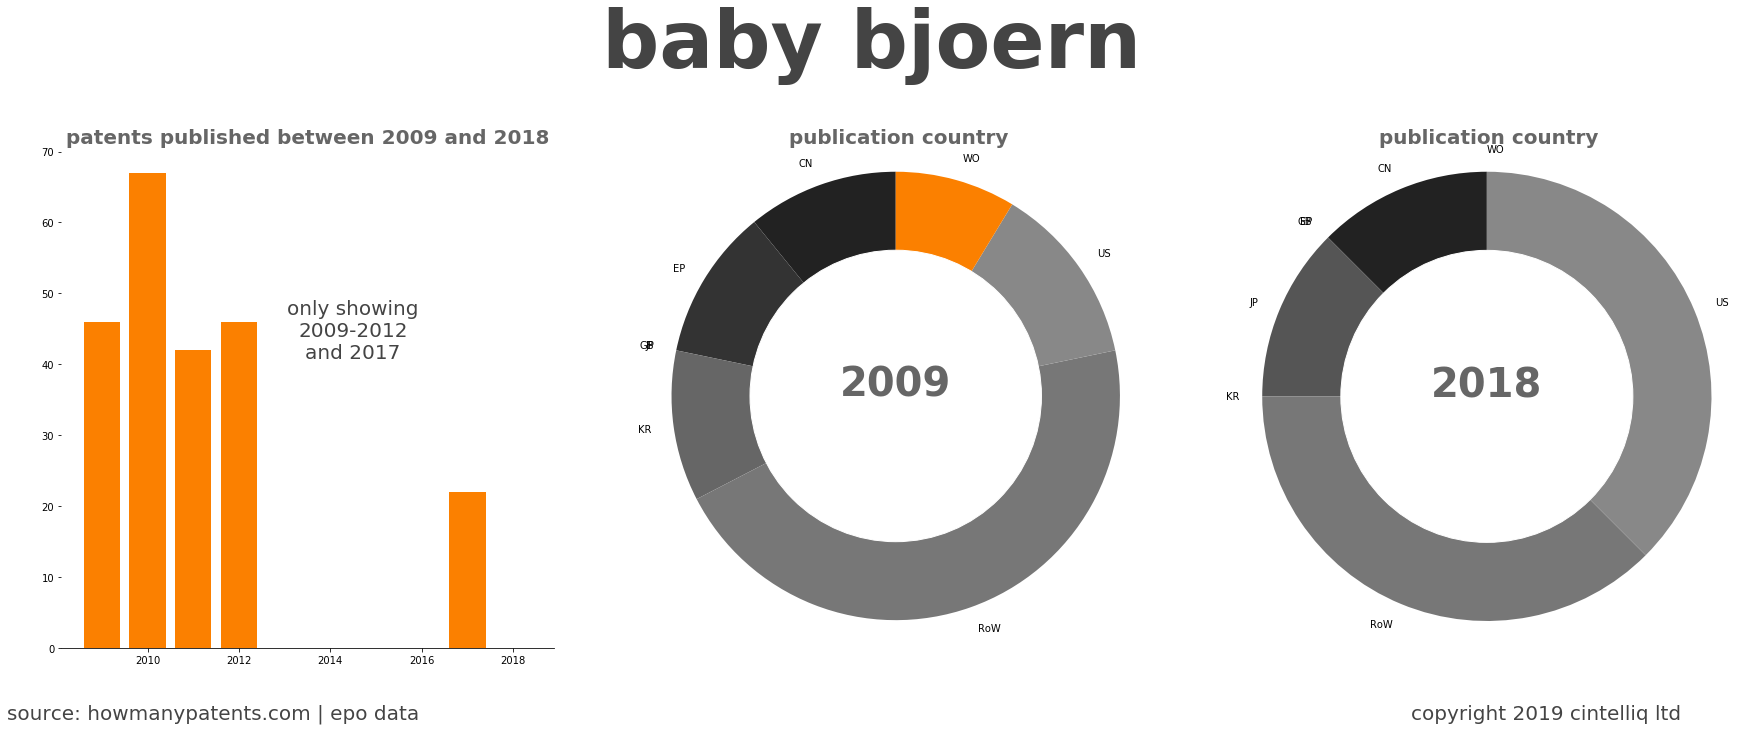 summary of patents for Baby Bjoern